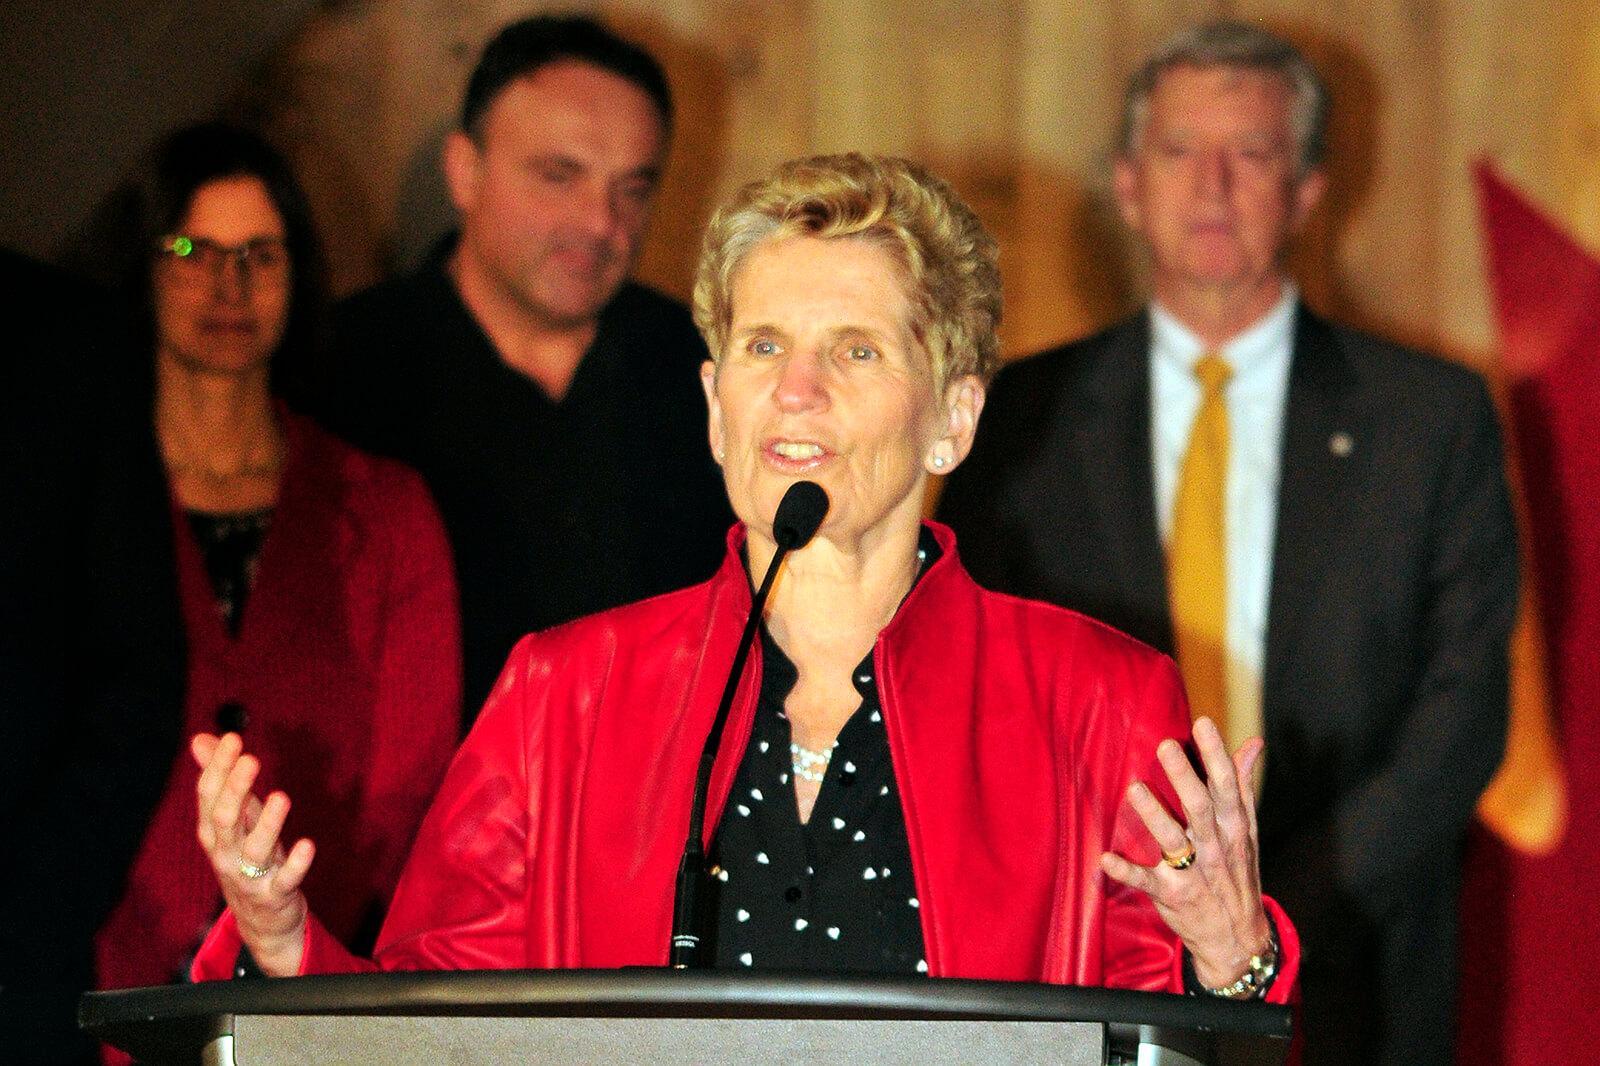 Ontario Premier Kathleen Wynne at a press conference at Canada Blooms 2018.